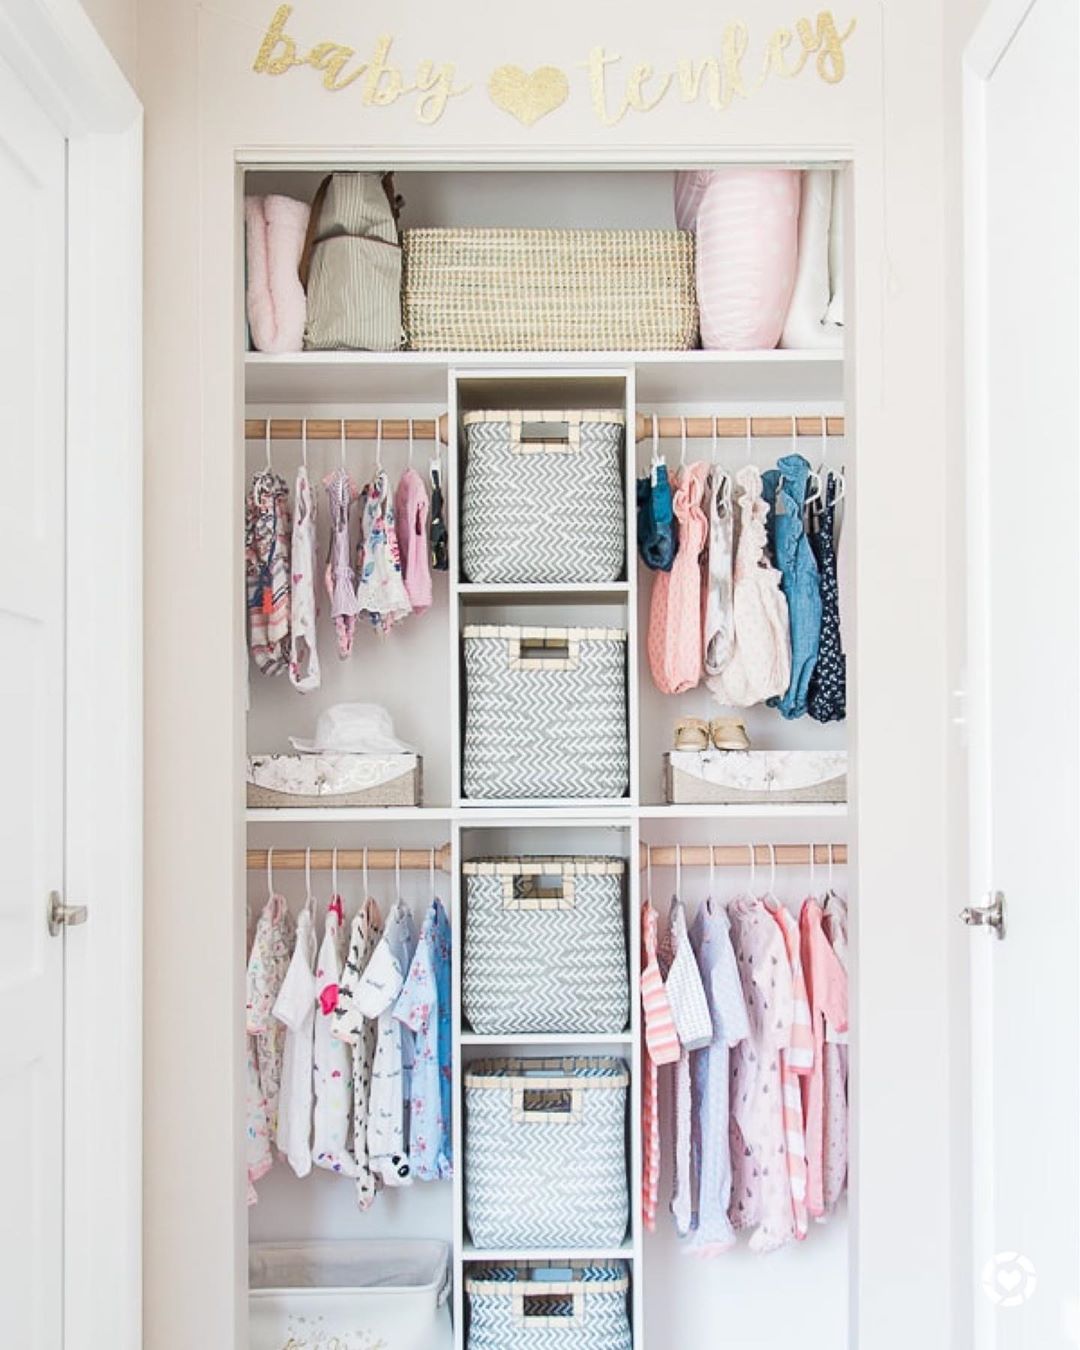 Baby closet with baskets. Photo by Instagram user @thegreenspringhome